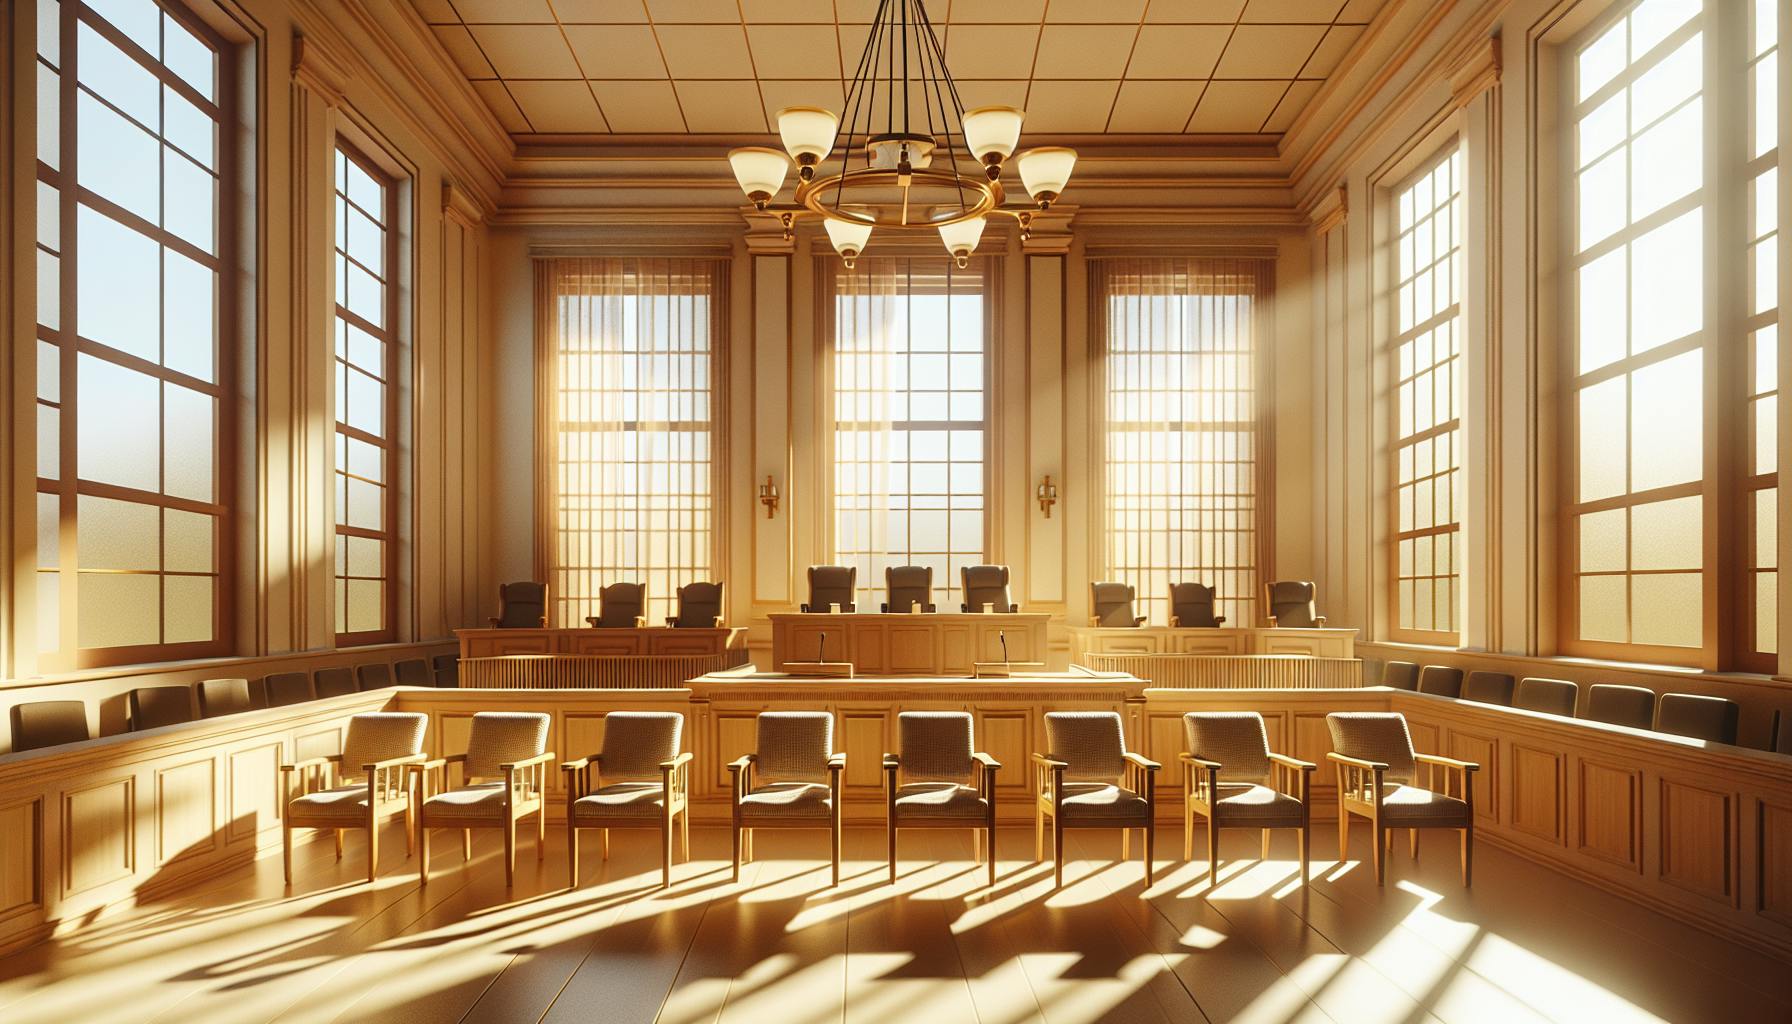 Federal Criminal Procedure Rule 23: The Right to a Jury Trial Examined